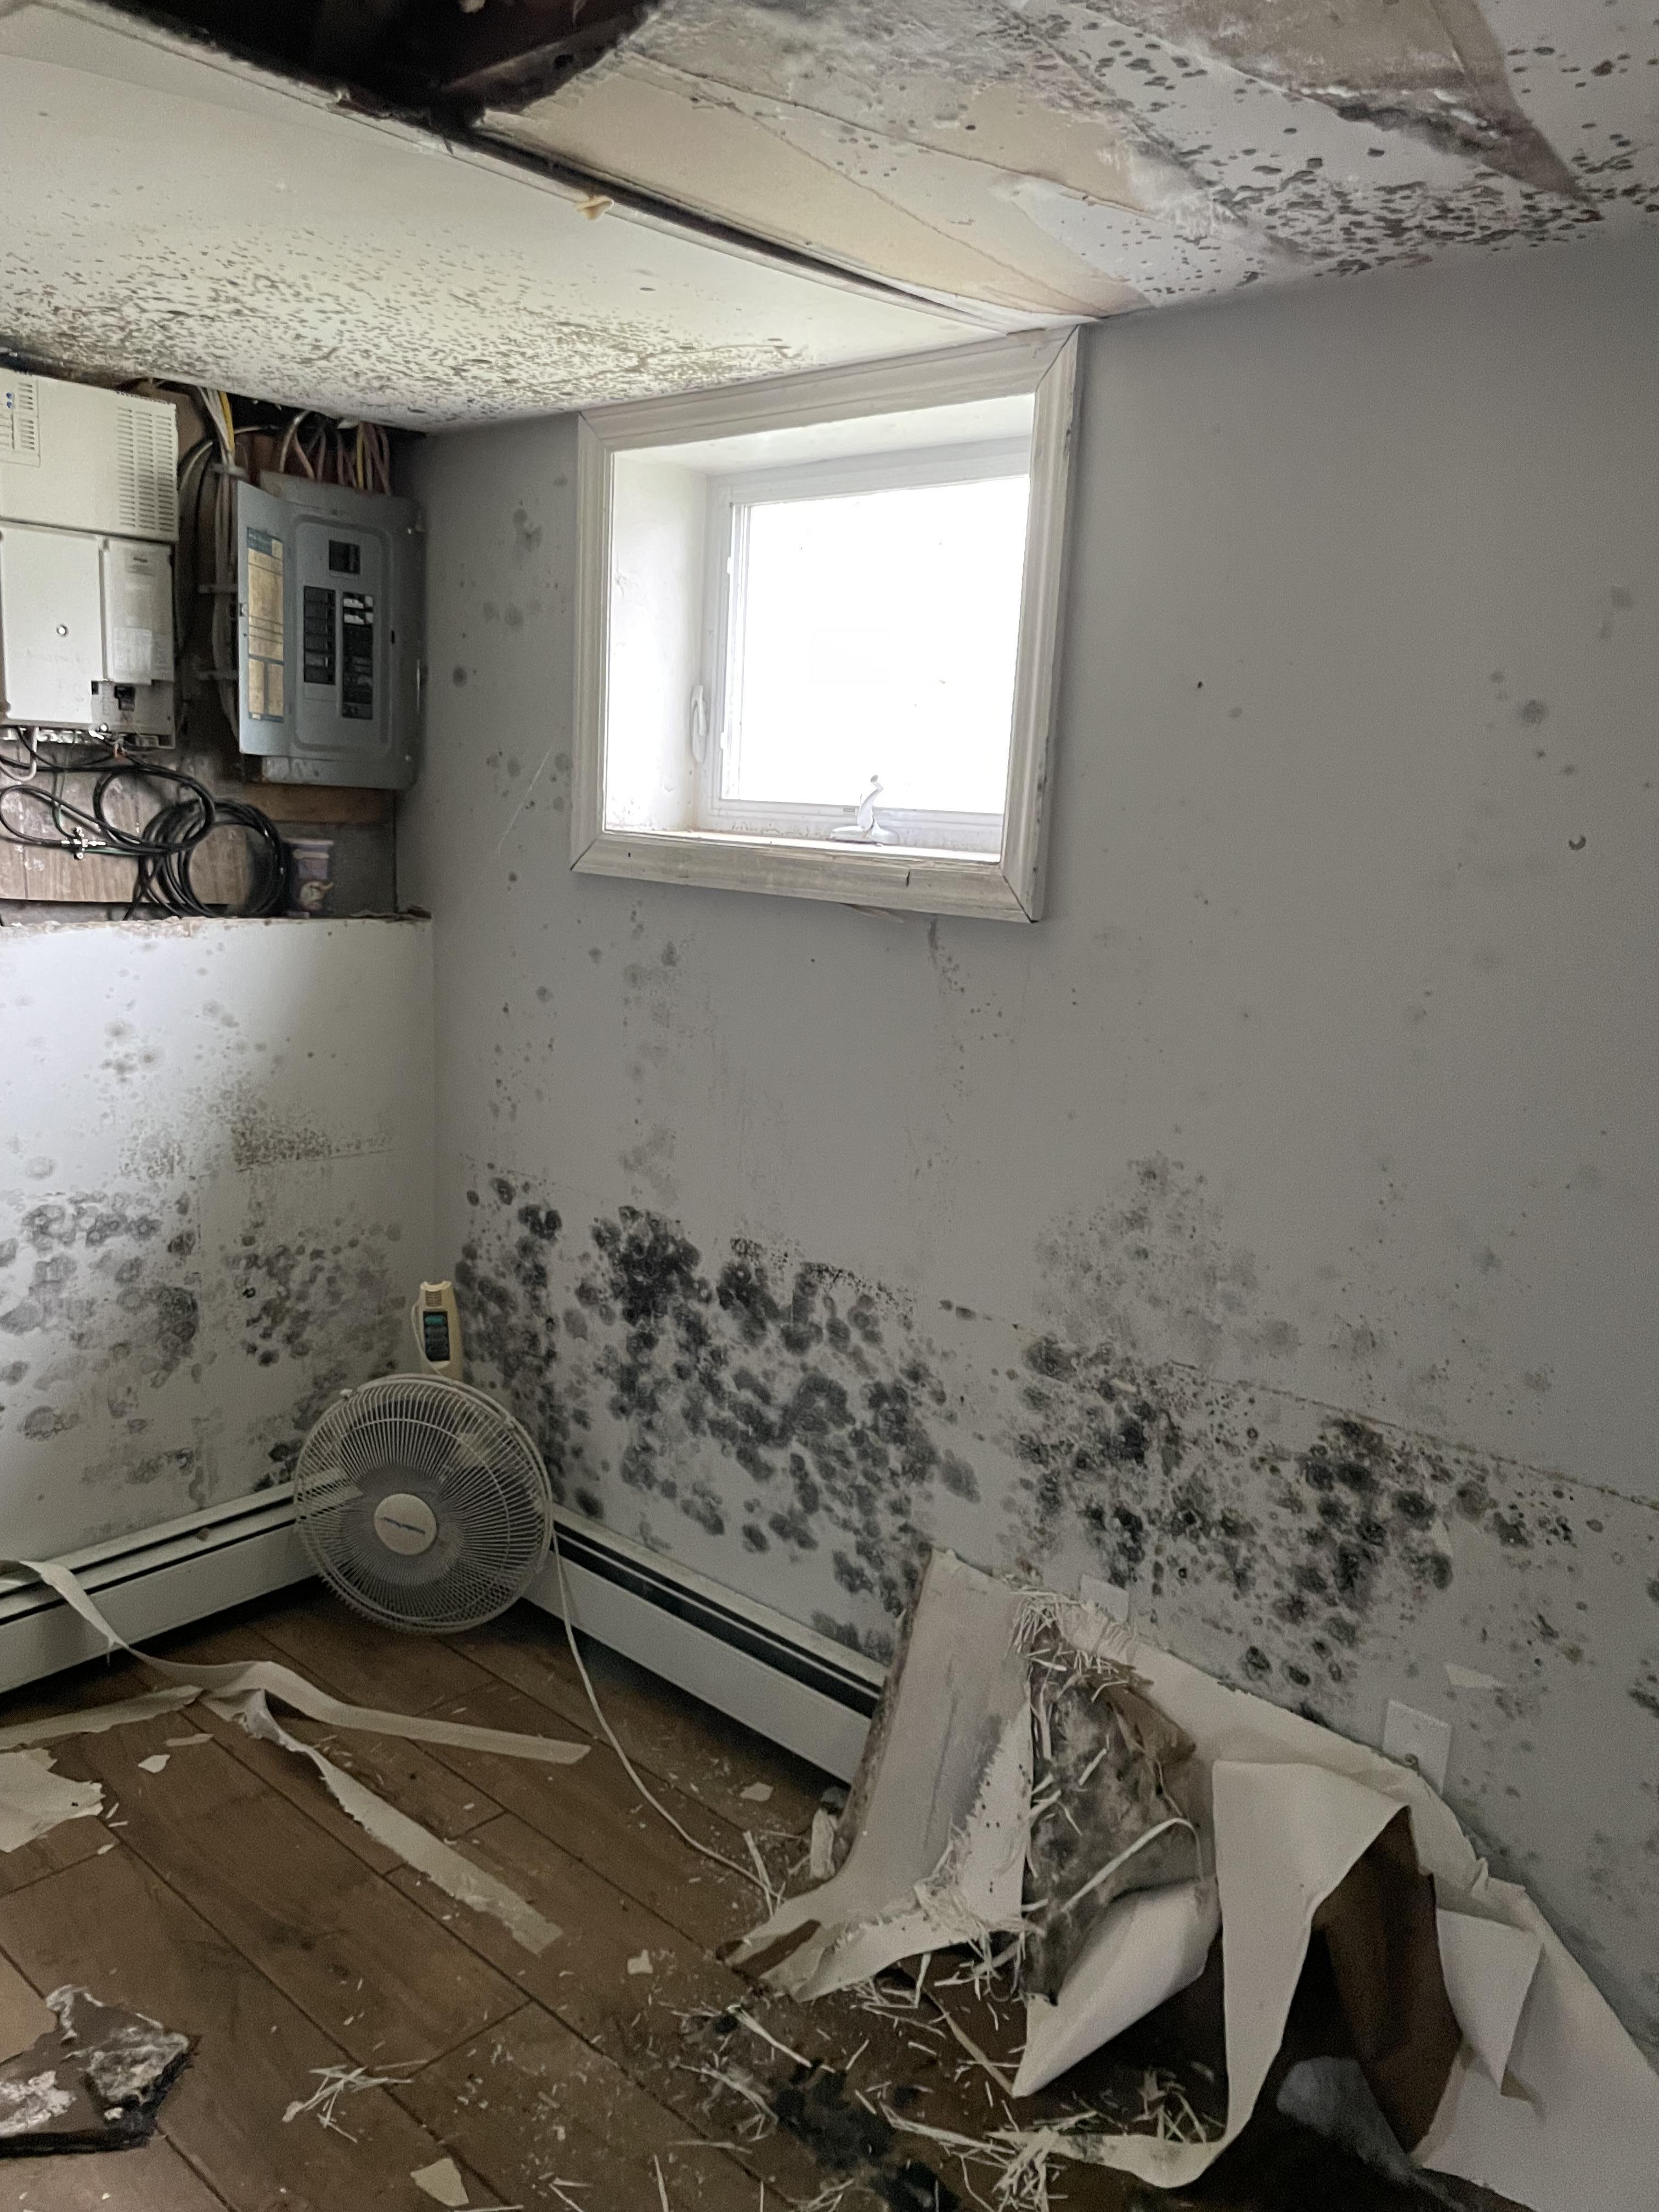 pipe burst water and mold cleanup in Brewster, NY